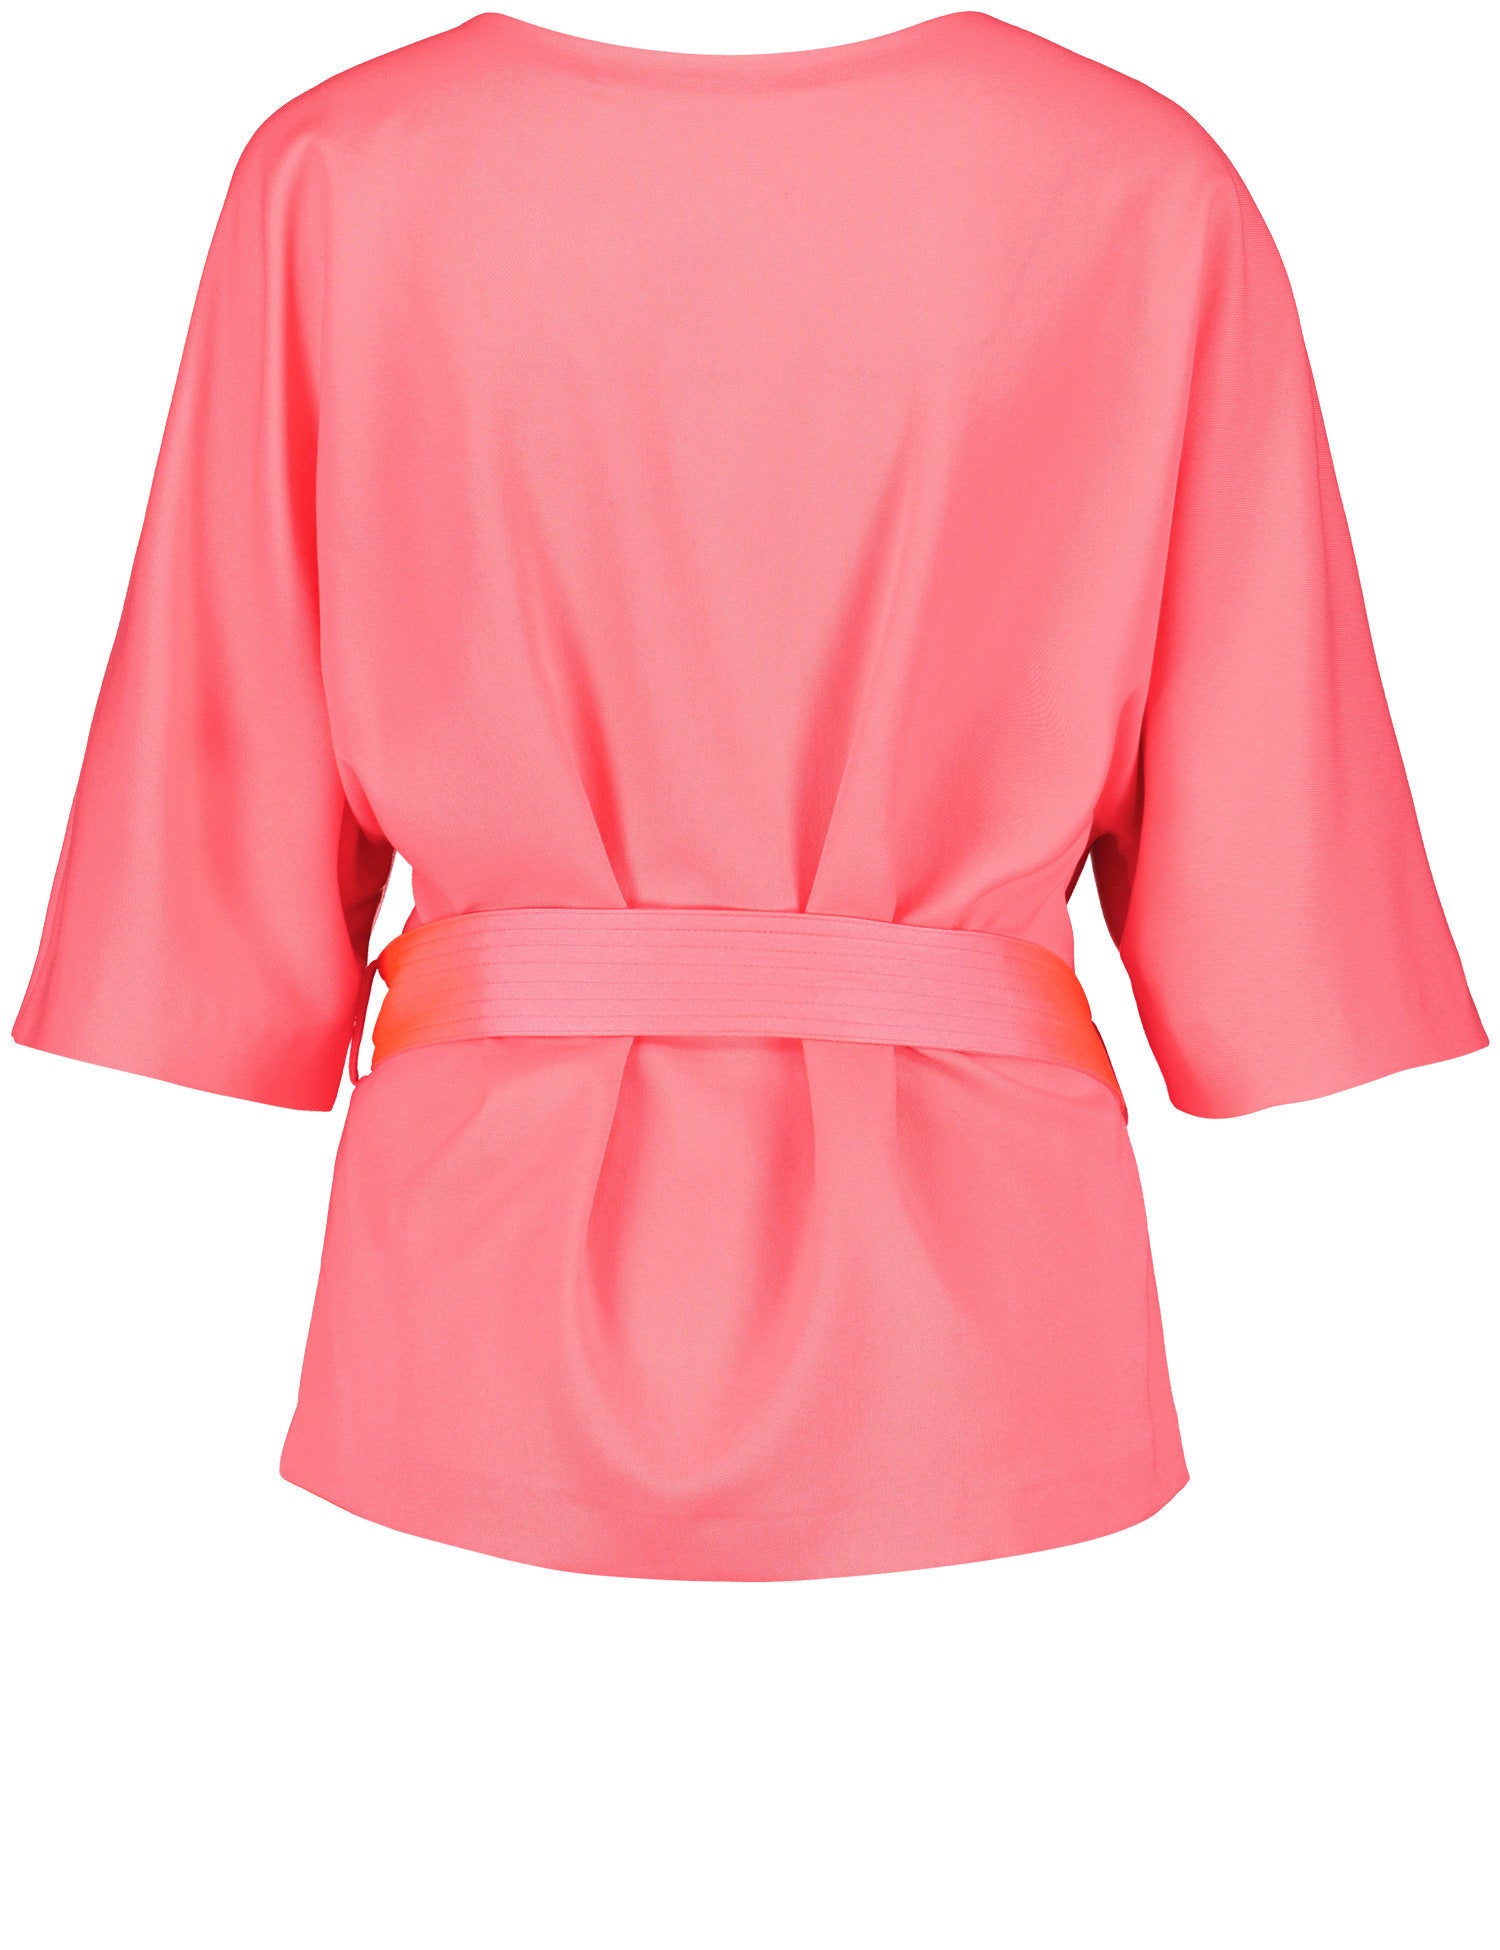 Flowing Blouse With Batwing Sleeves And A Tie-Around Belt_560357-11051_3430_03